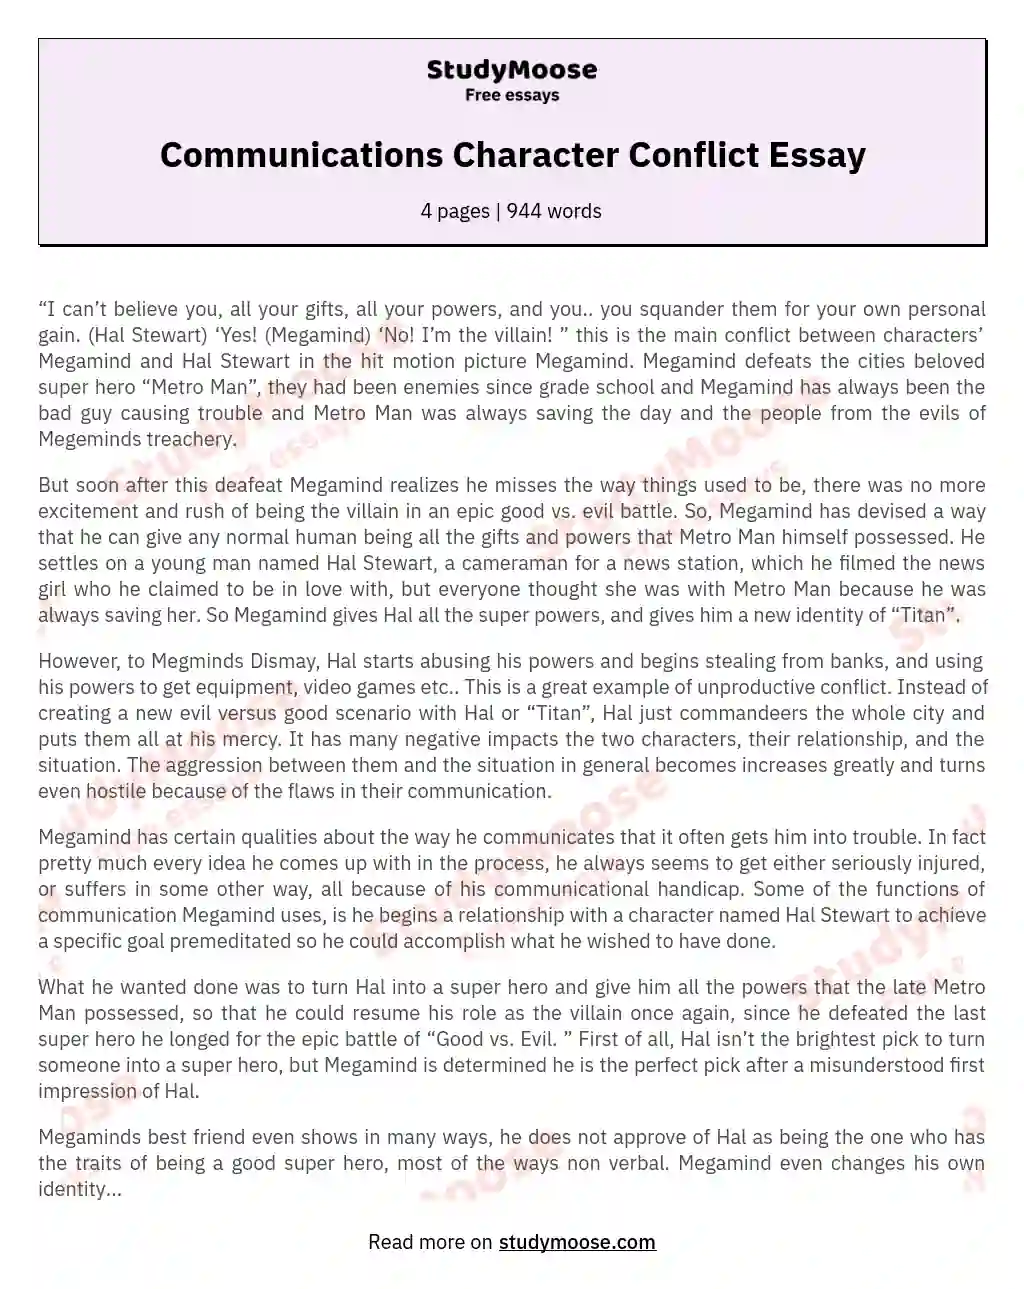 Communications Character Conflict Essay essay